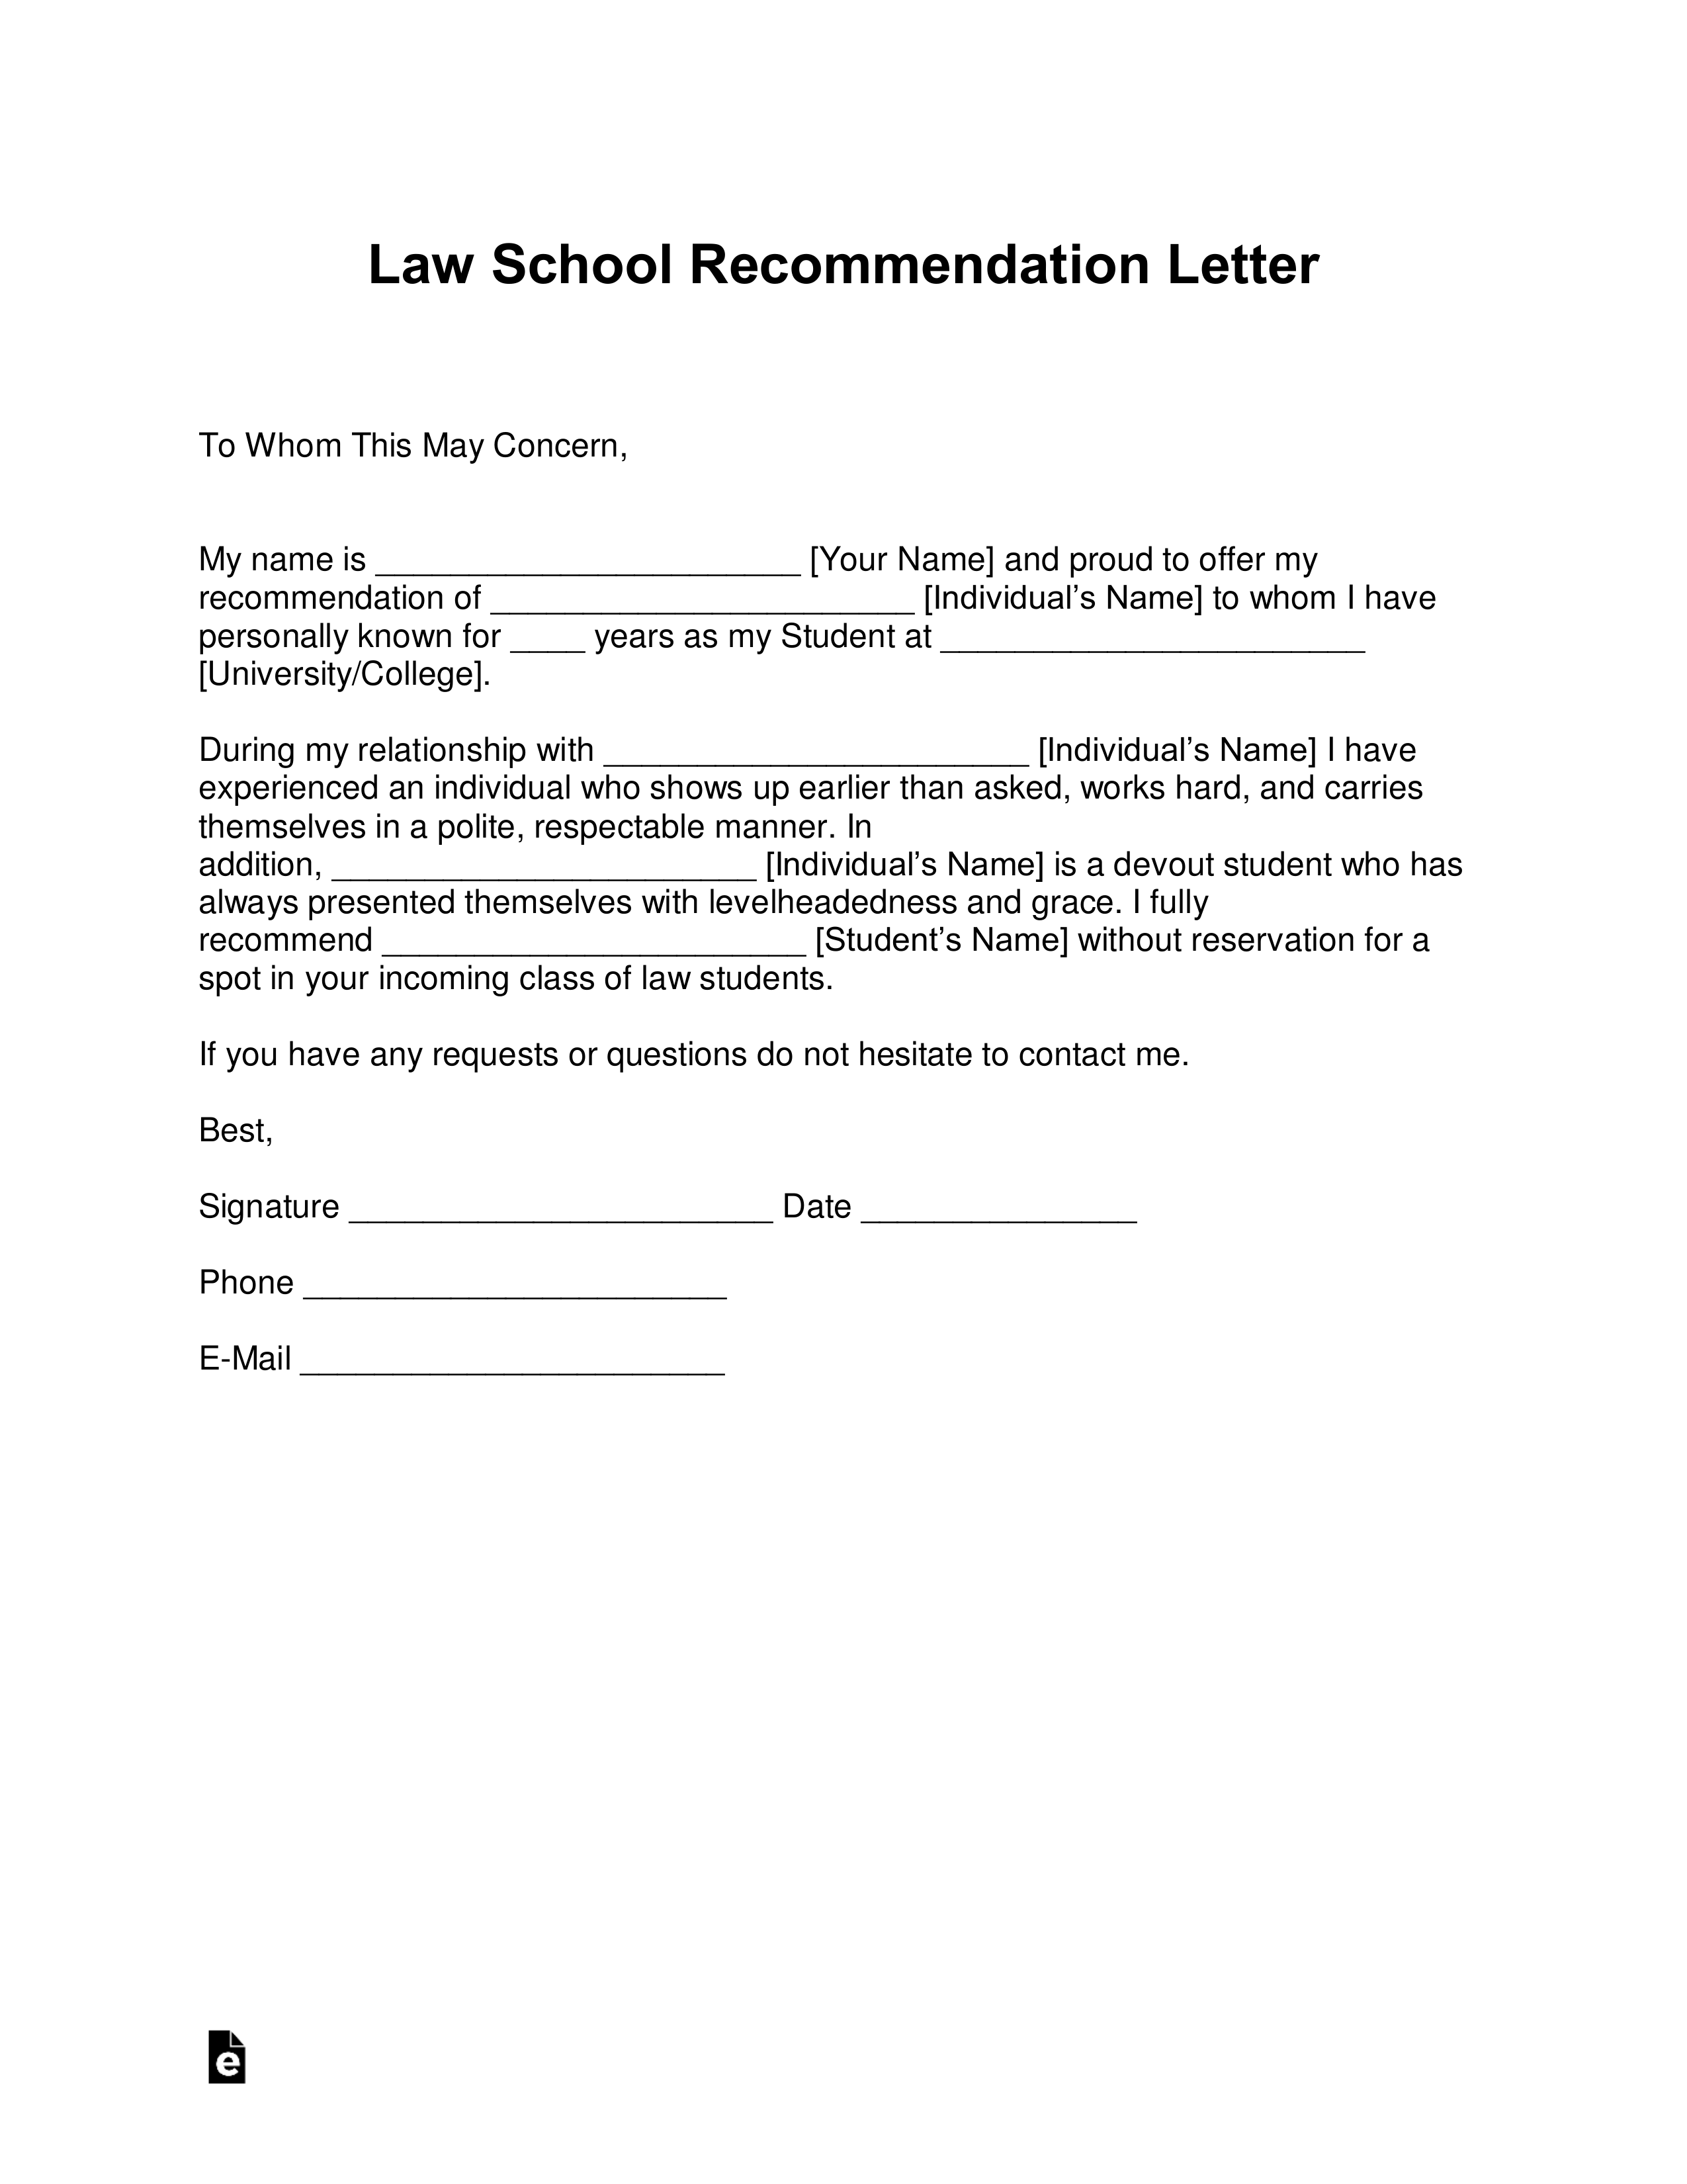 Letter Of Recommendation College Sample from eforms.com